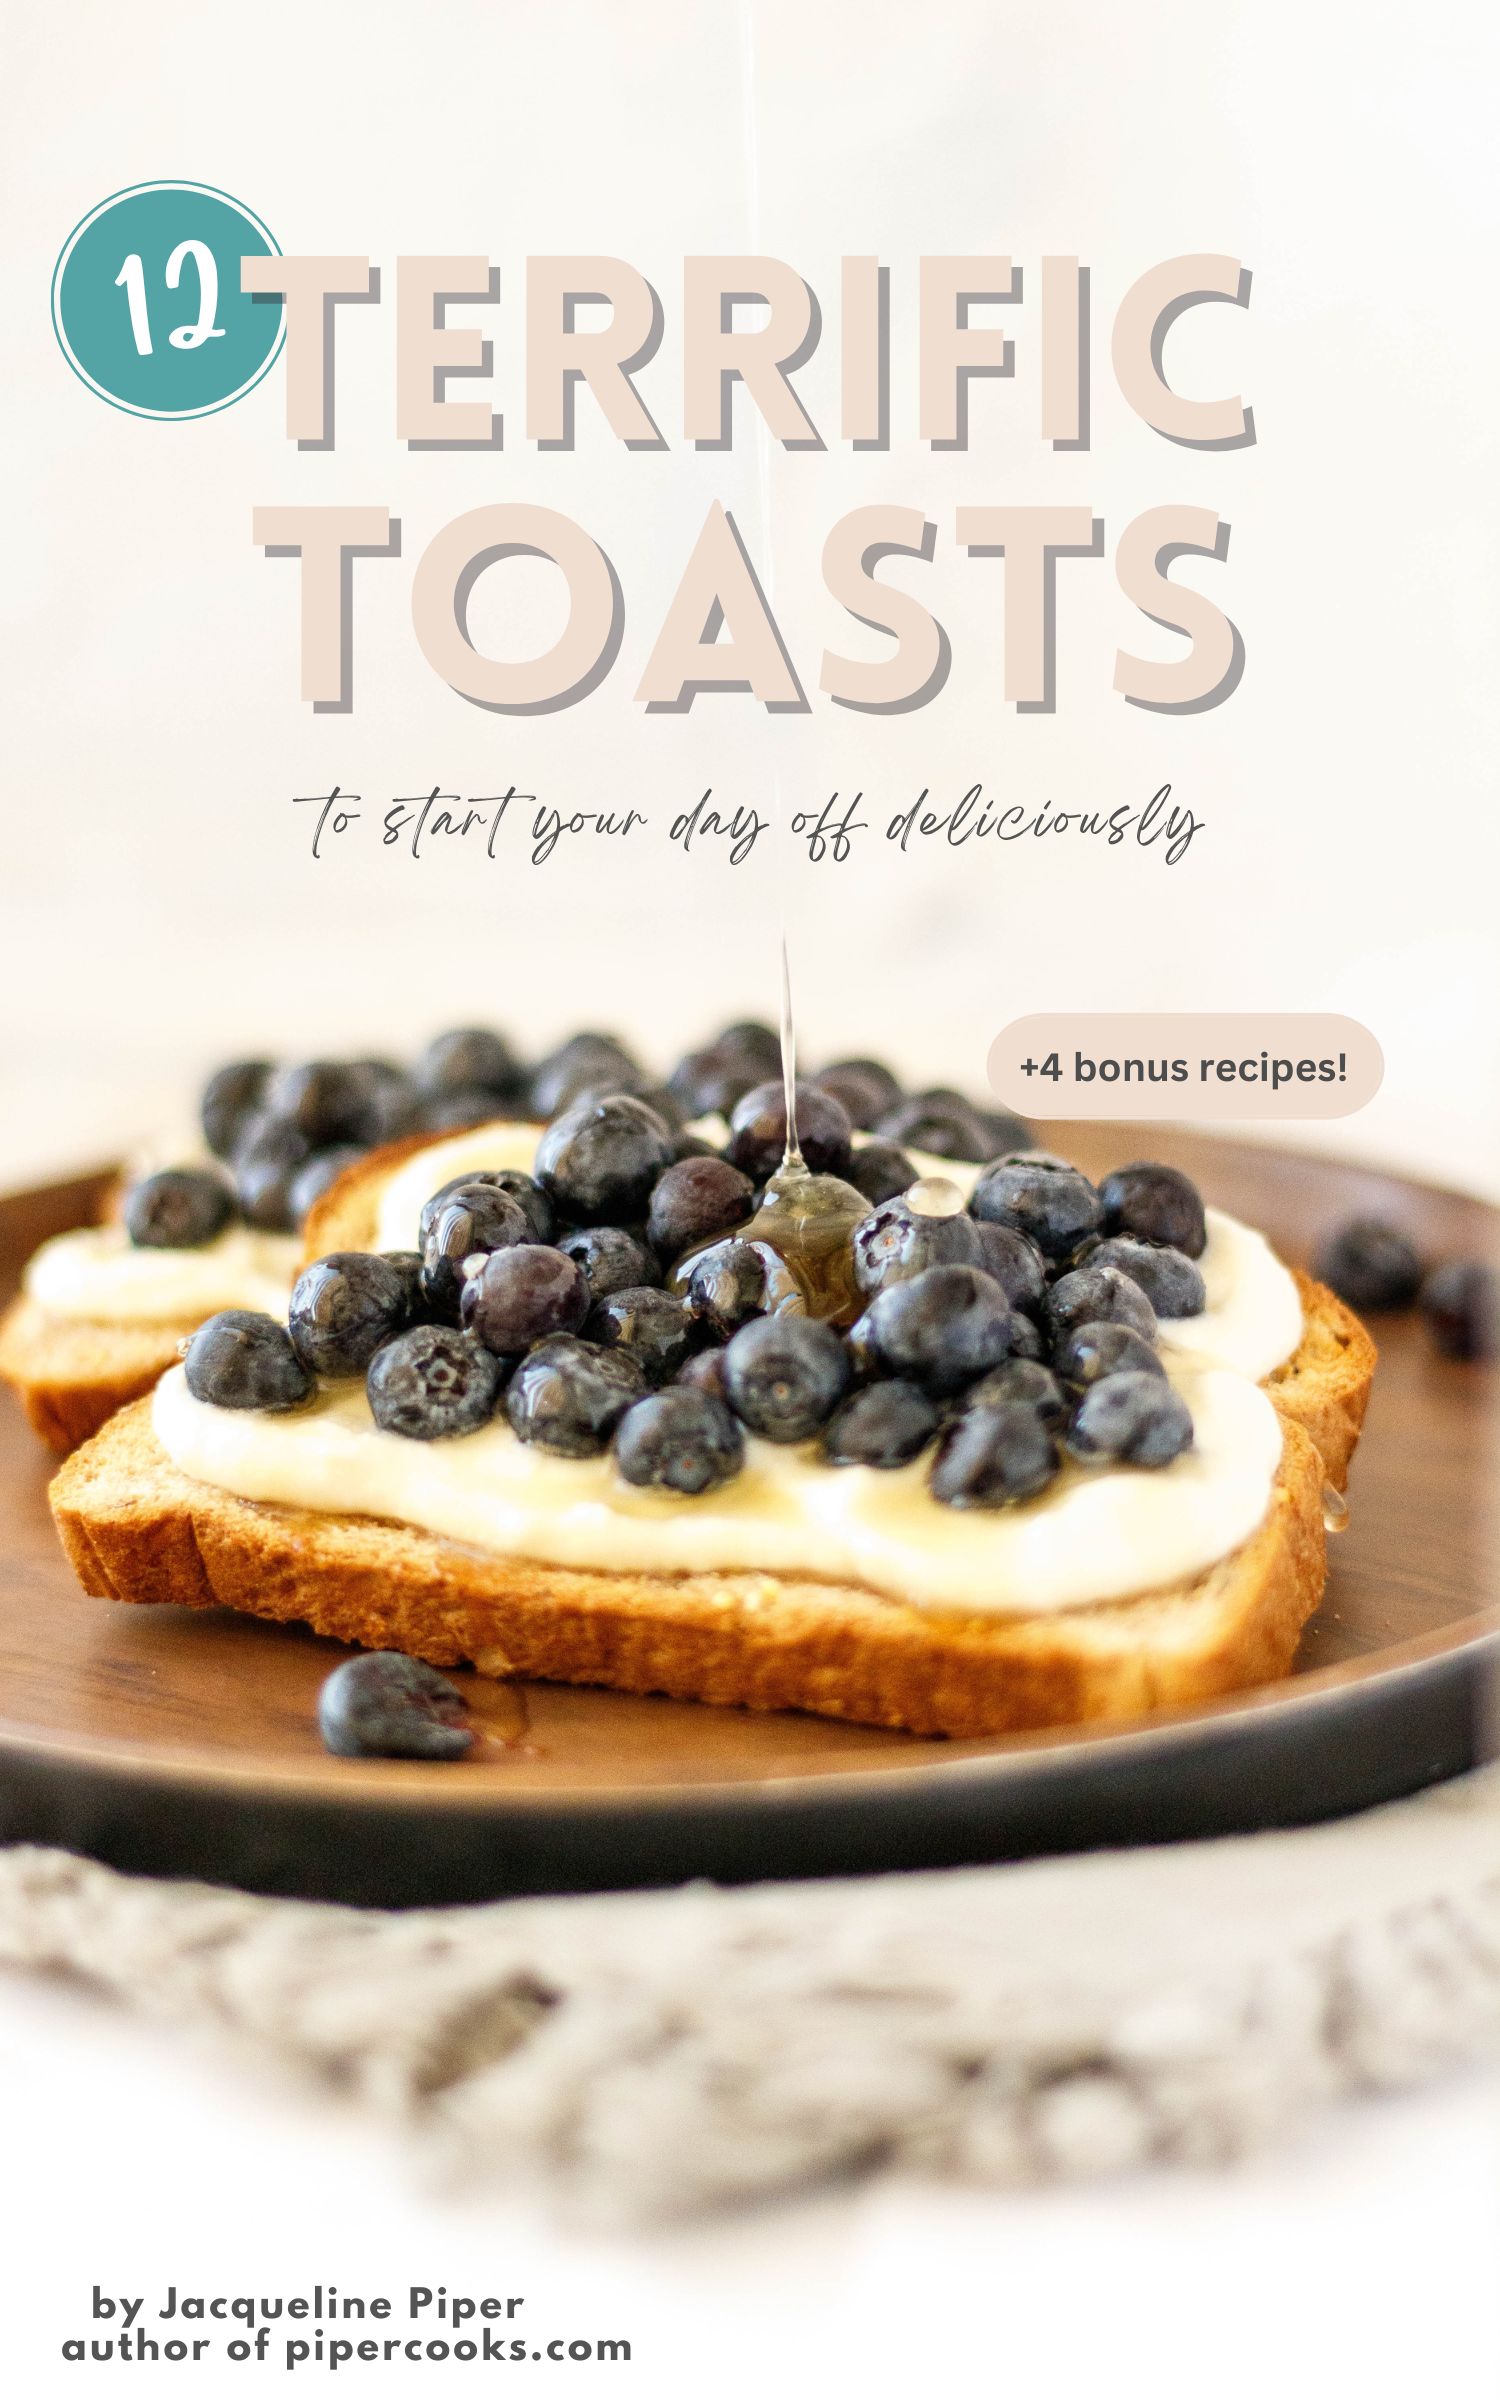 A cover for a book called 12 Terrific Toasts with a photo of toast with ricotta cheese and blueberries.